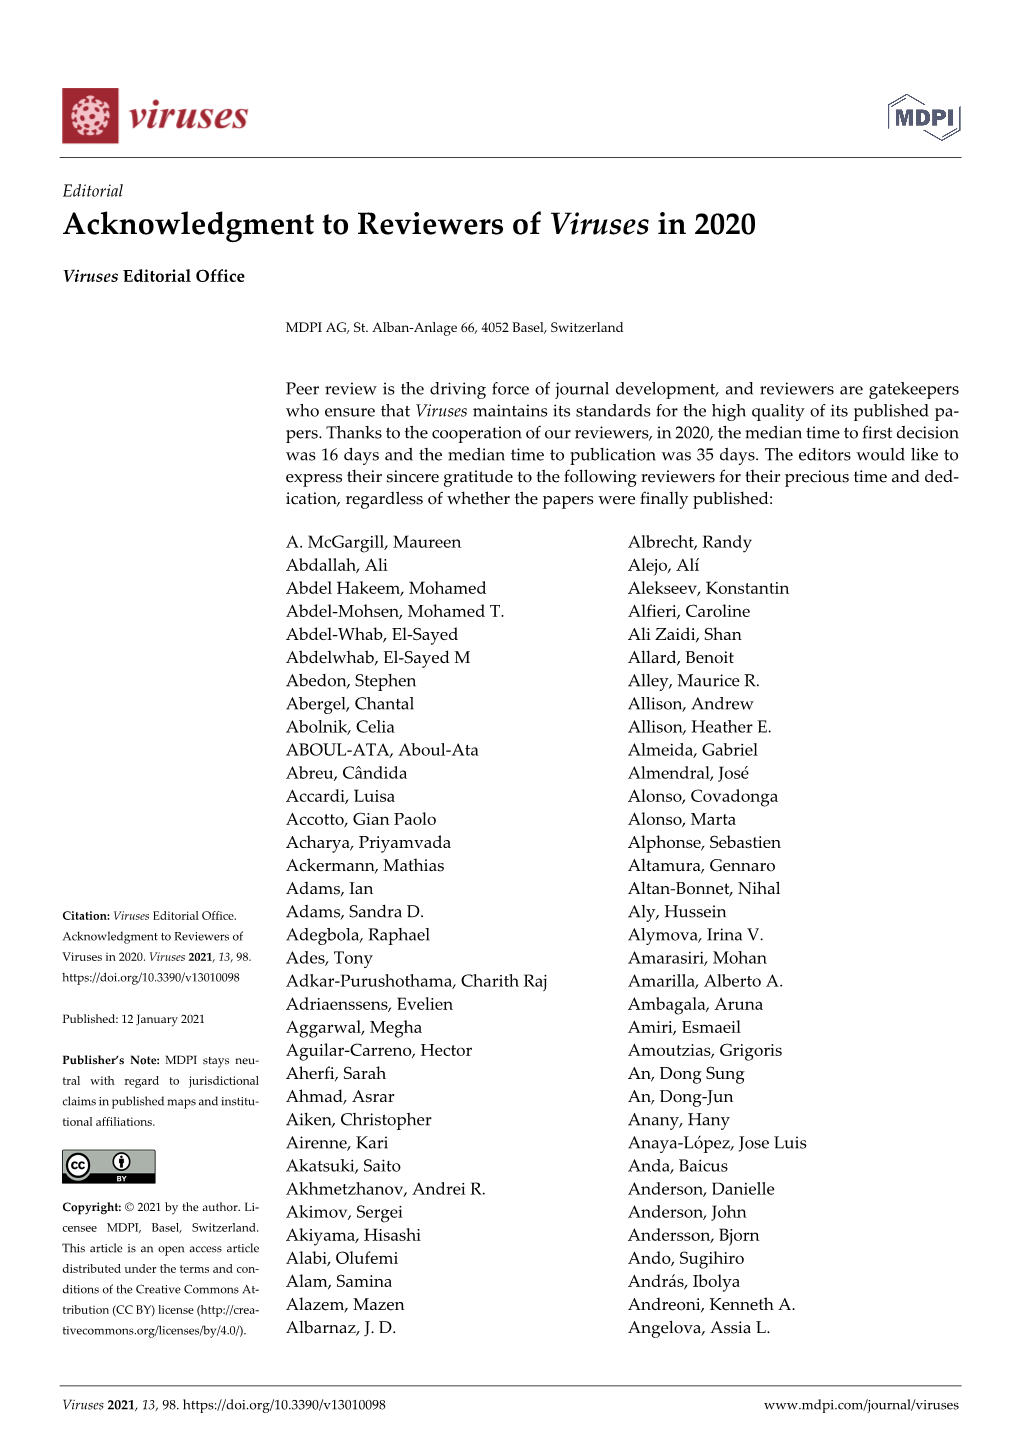 Acknowledgment to Reviewers of Viruses in 2020